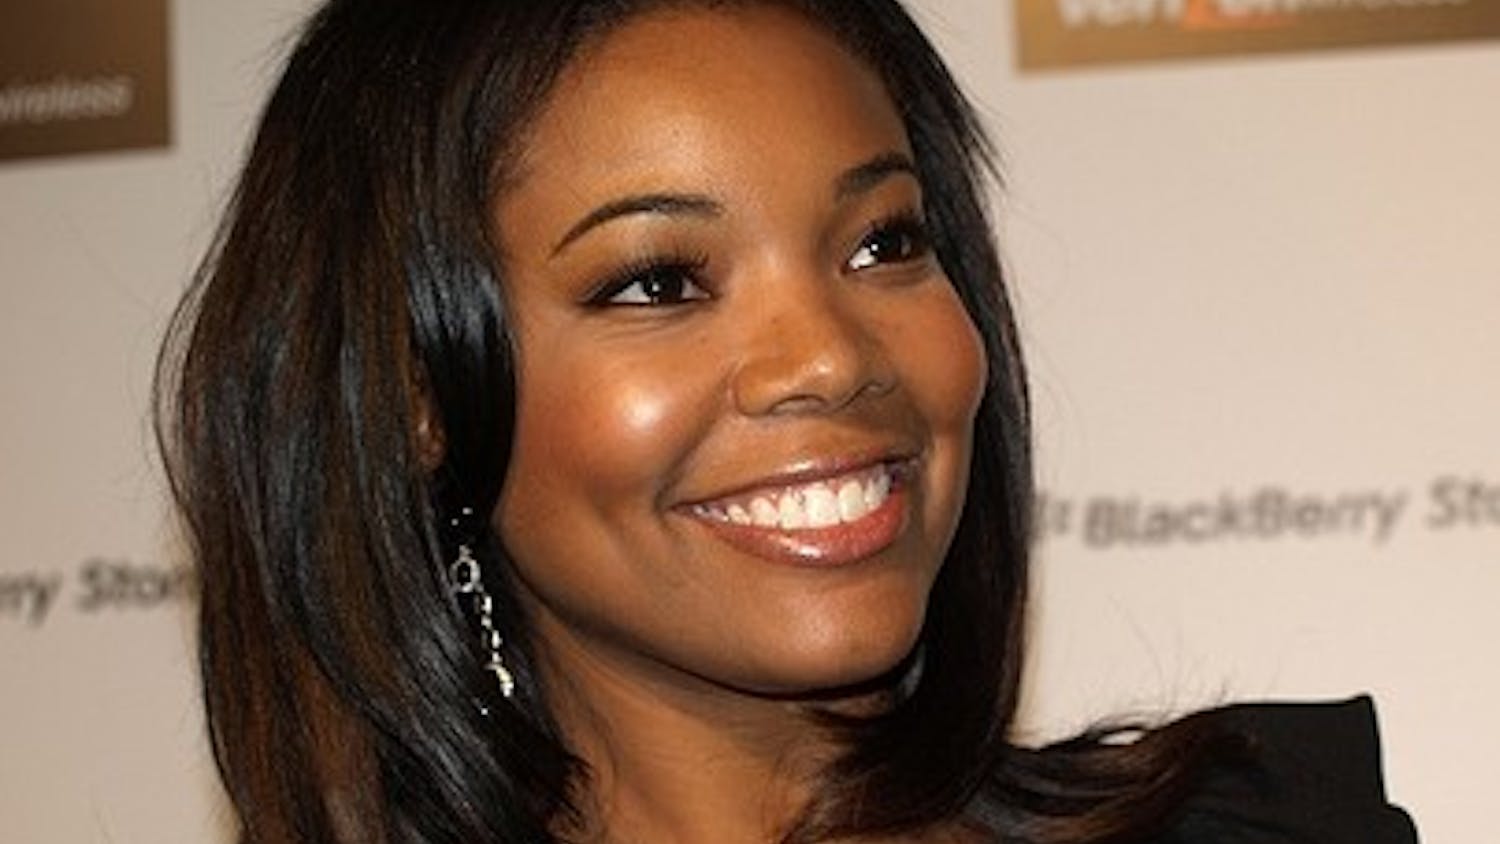 Gabrielle Union, an actress and activist, will speak at AU on Oct. 21.